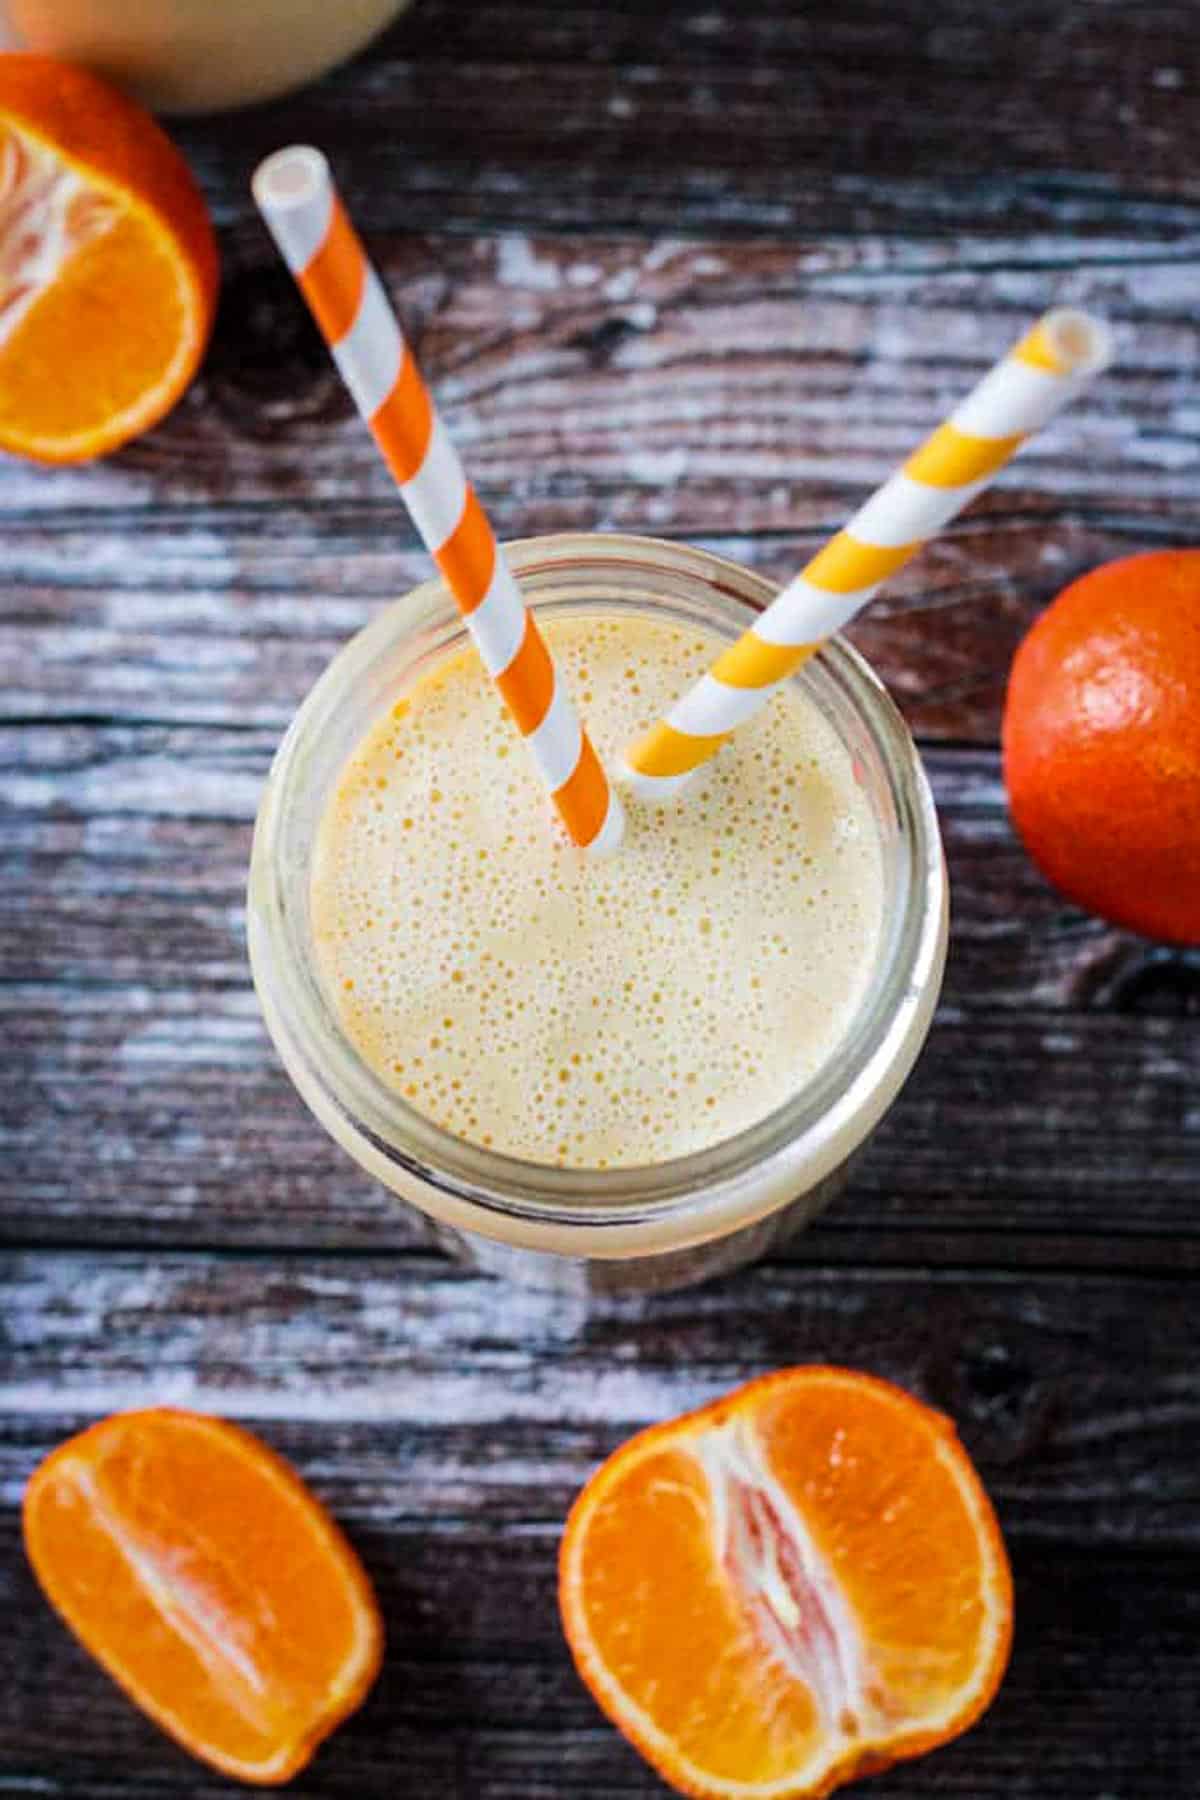 Overhead view of a creamy orange smoothie with two straws sticking out.